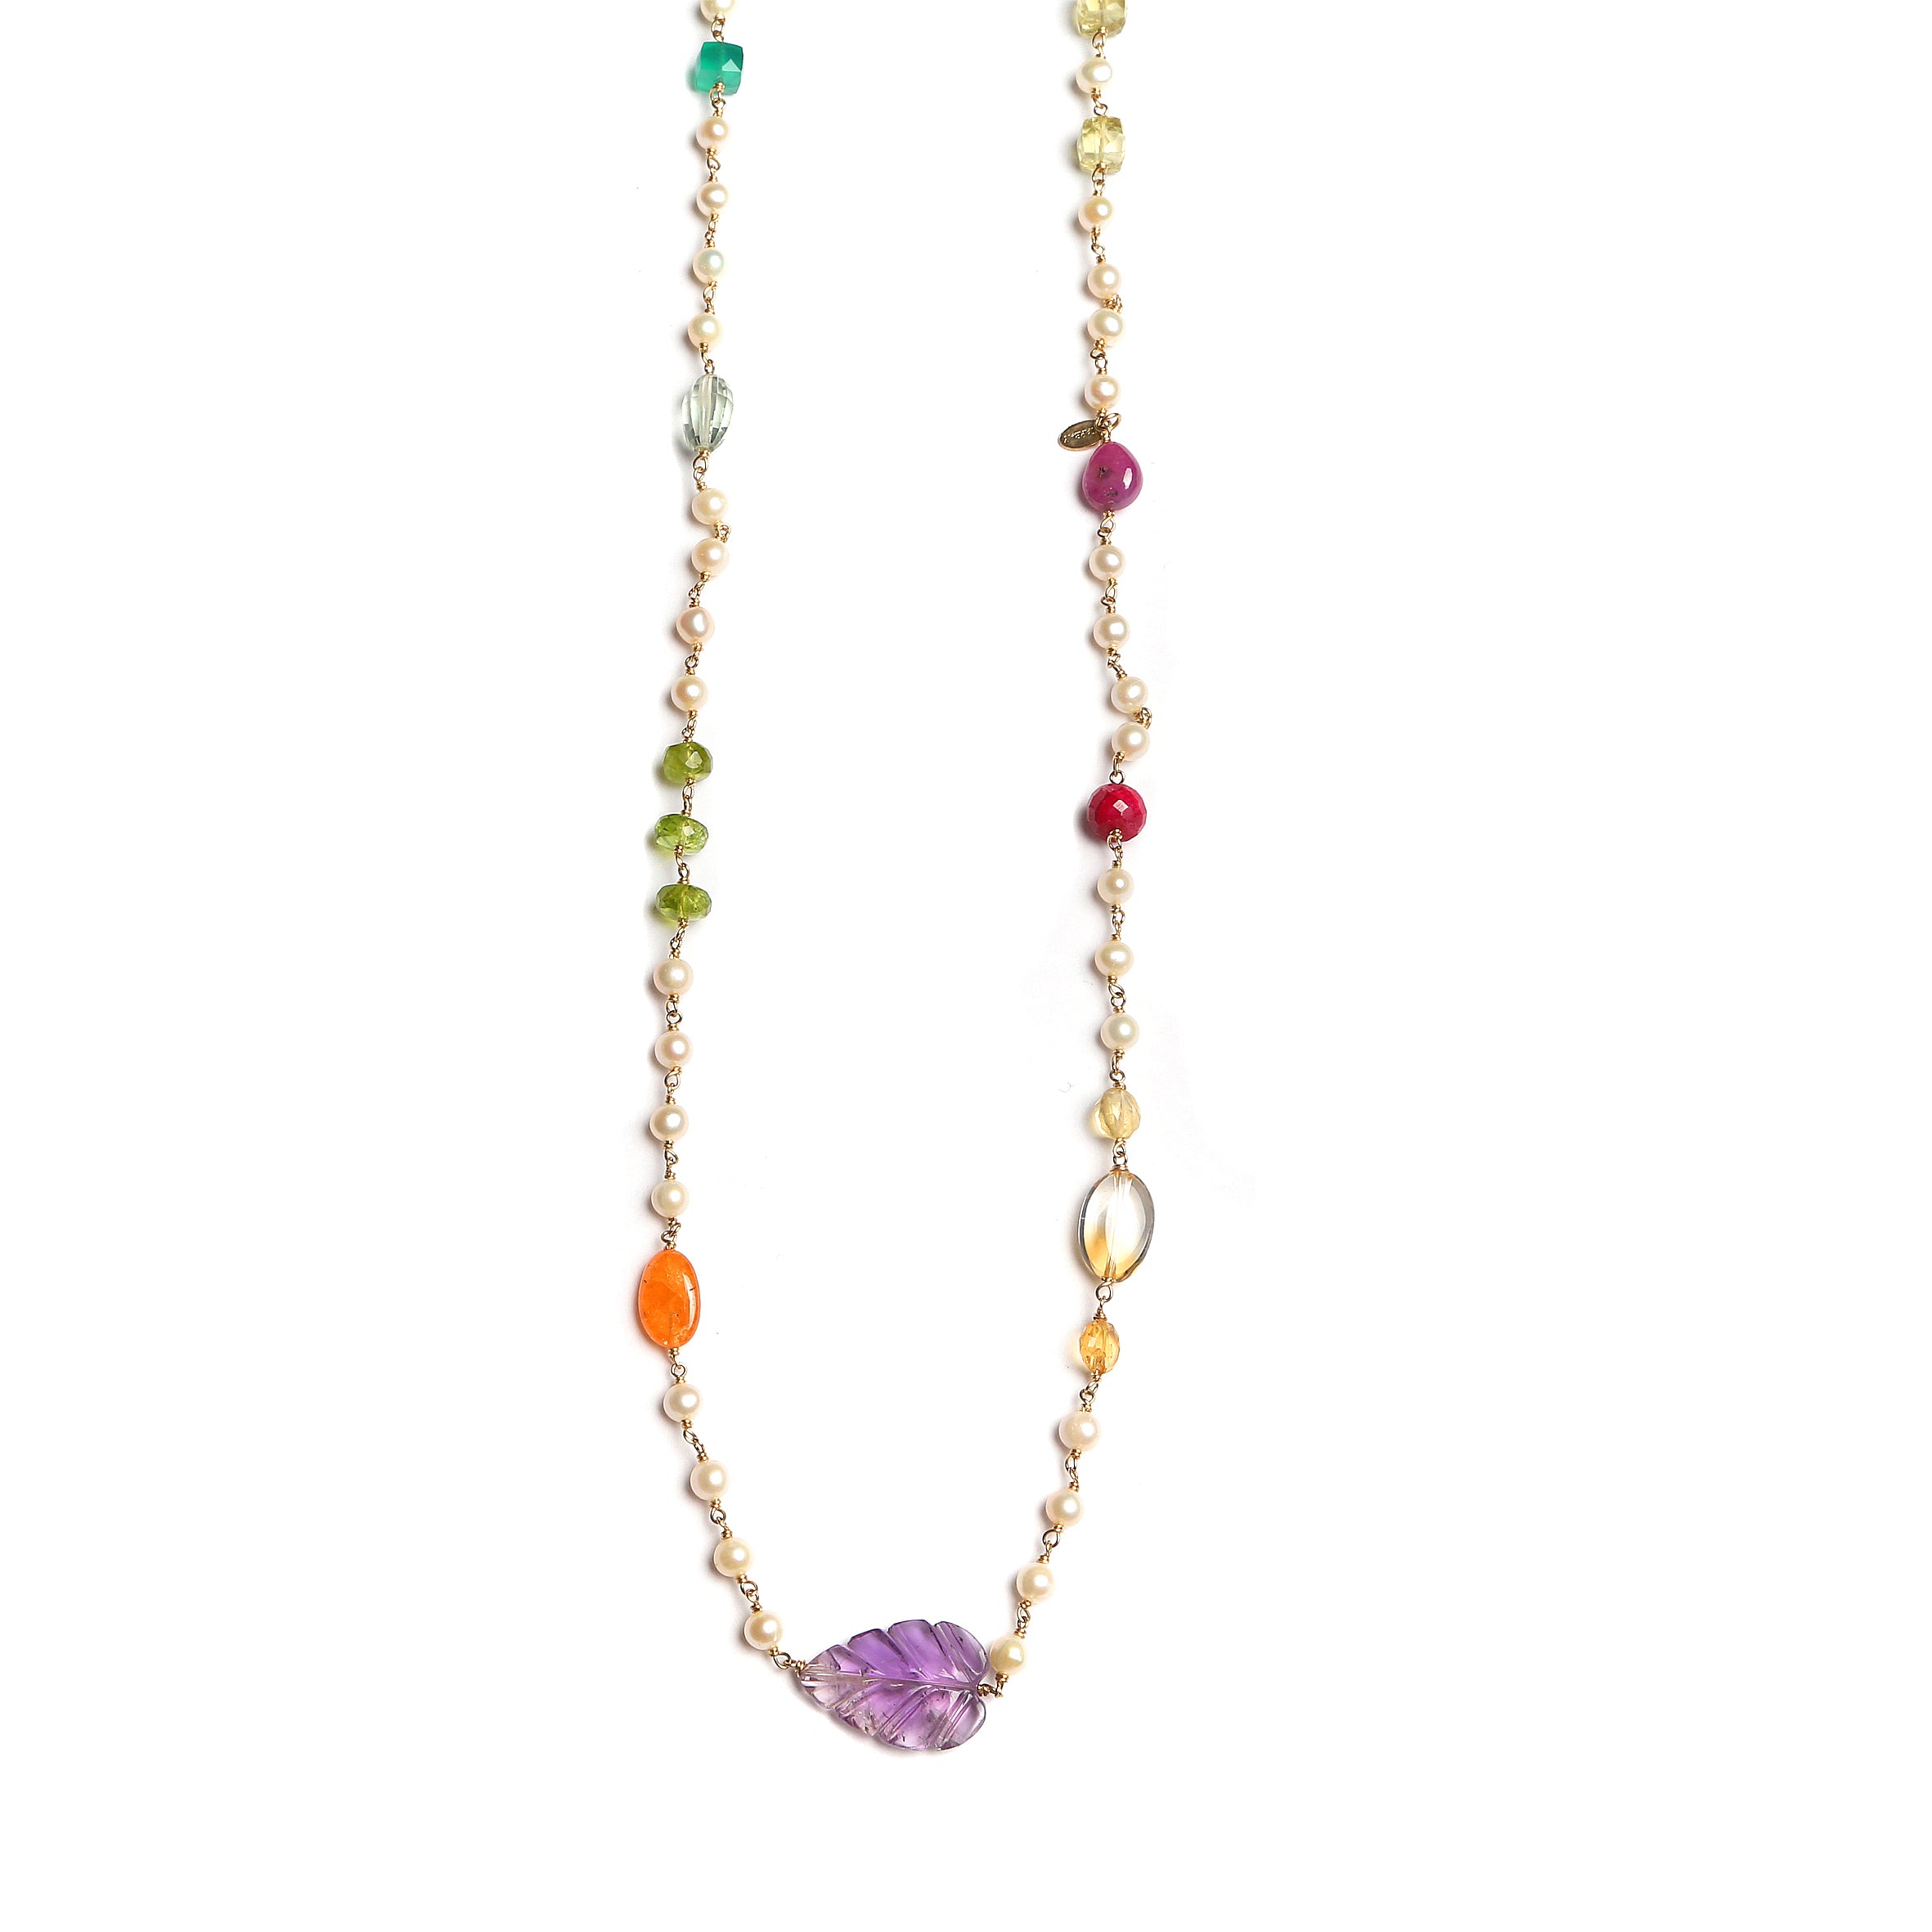 Maeve Long Necklace -Ppearl, citrine, amethyst, topaz, ruby, tanzanite, spperssatite, green Onyx, green amethyst &peridot Necklaces TARBAY   